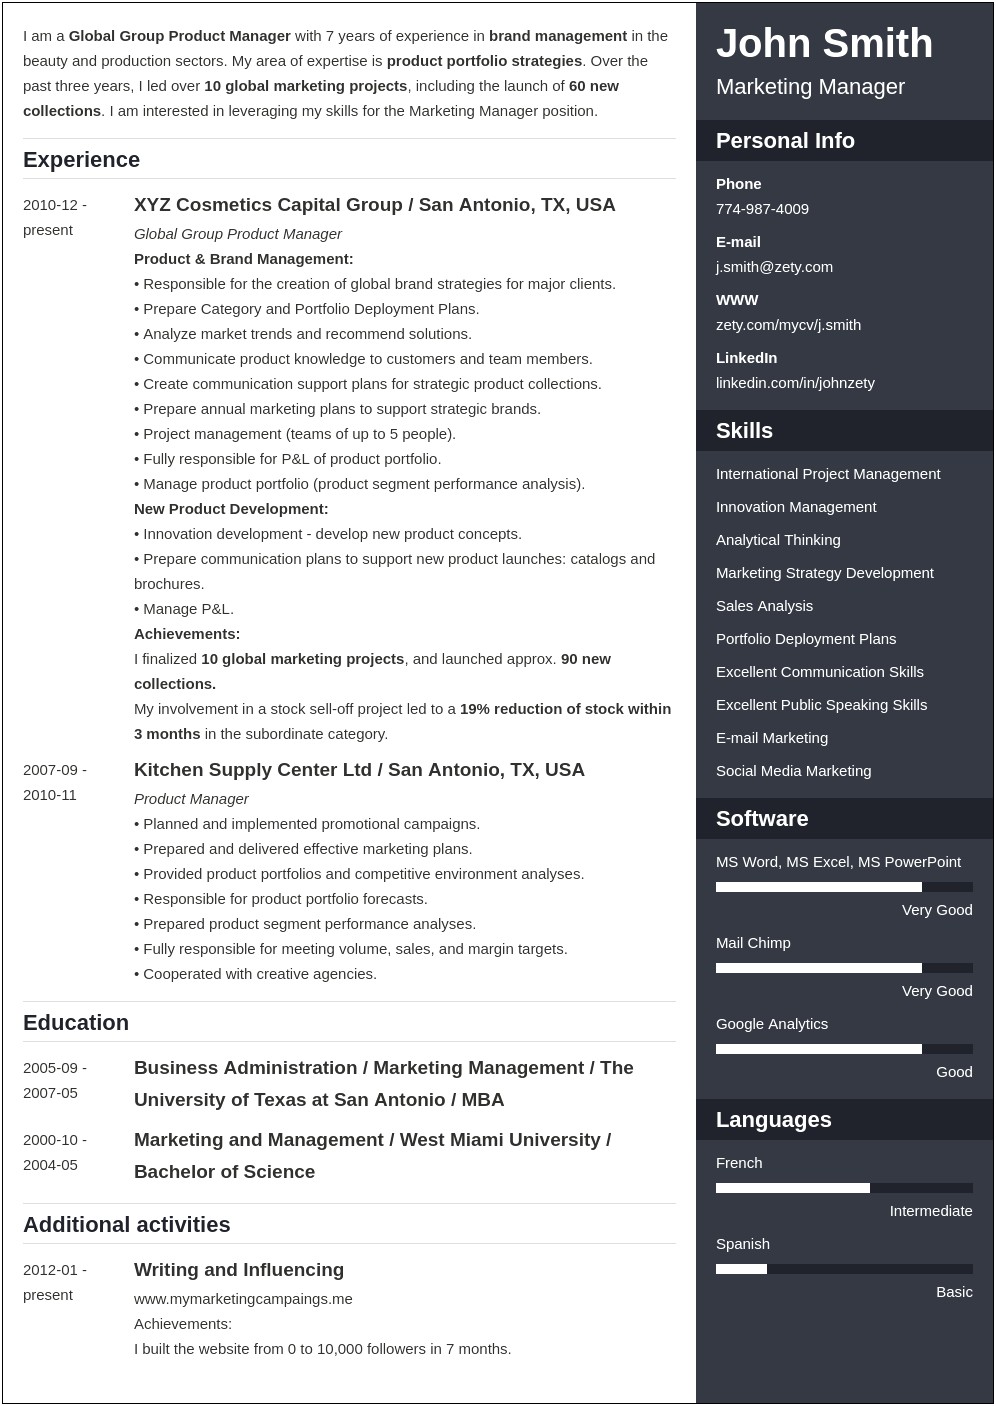 Listing Education Experience And Skills On Your Resume